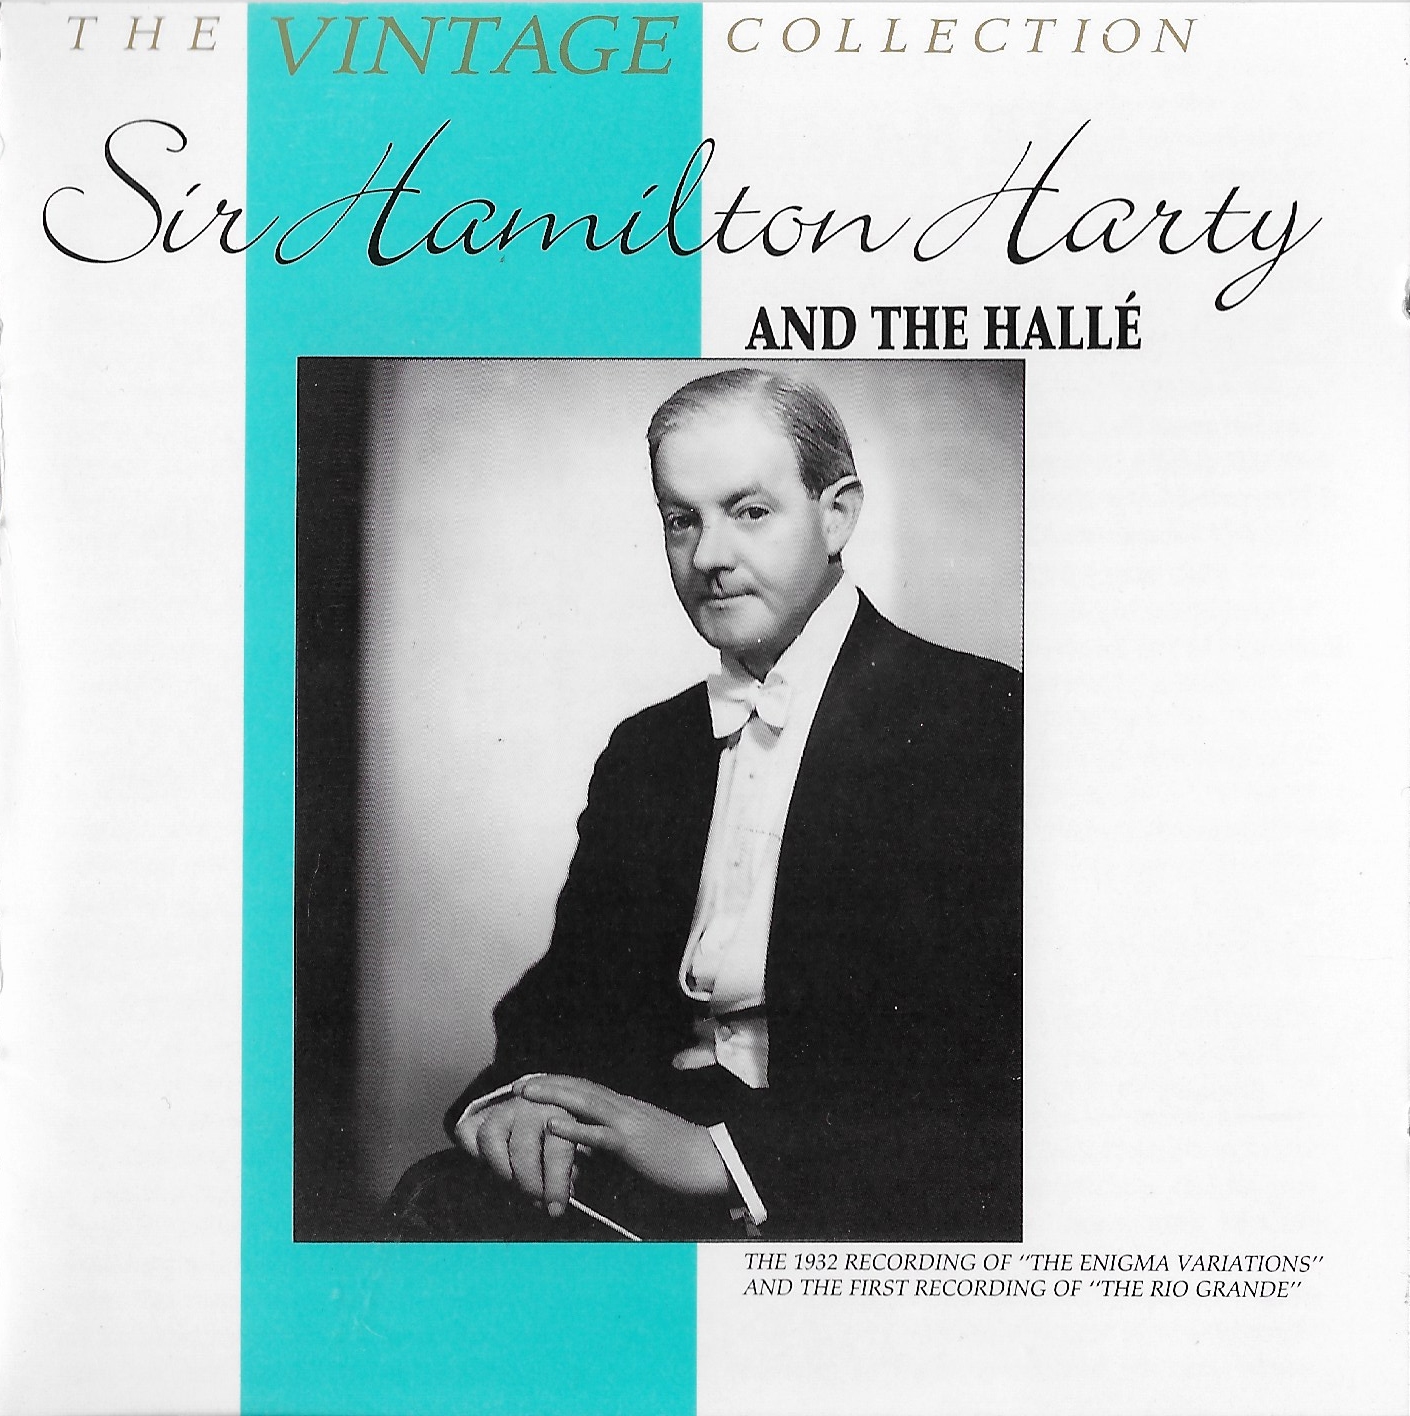 Picture of BBCCD756 The vintage collection - Hamilton Harty and The Halle by artist Hamilton Harty from the BBC records and Tapes library